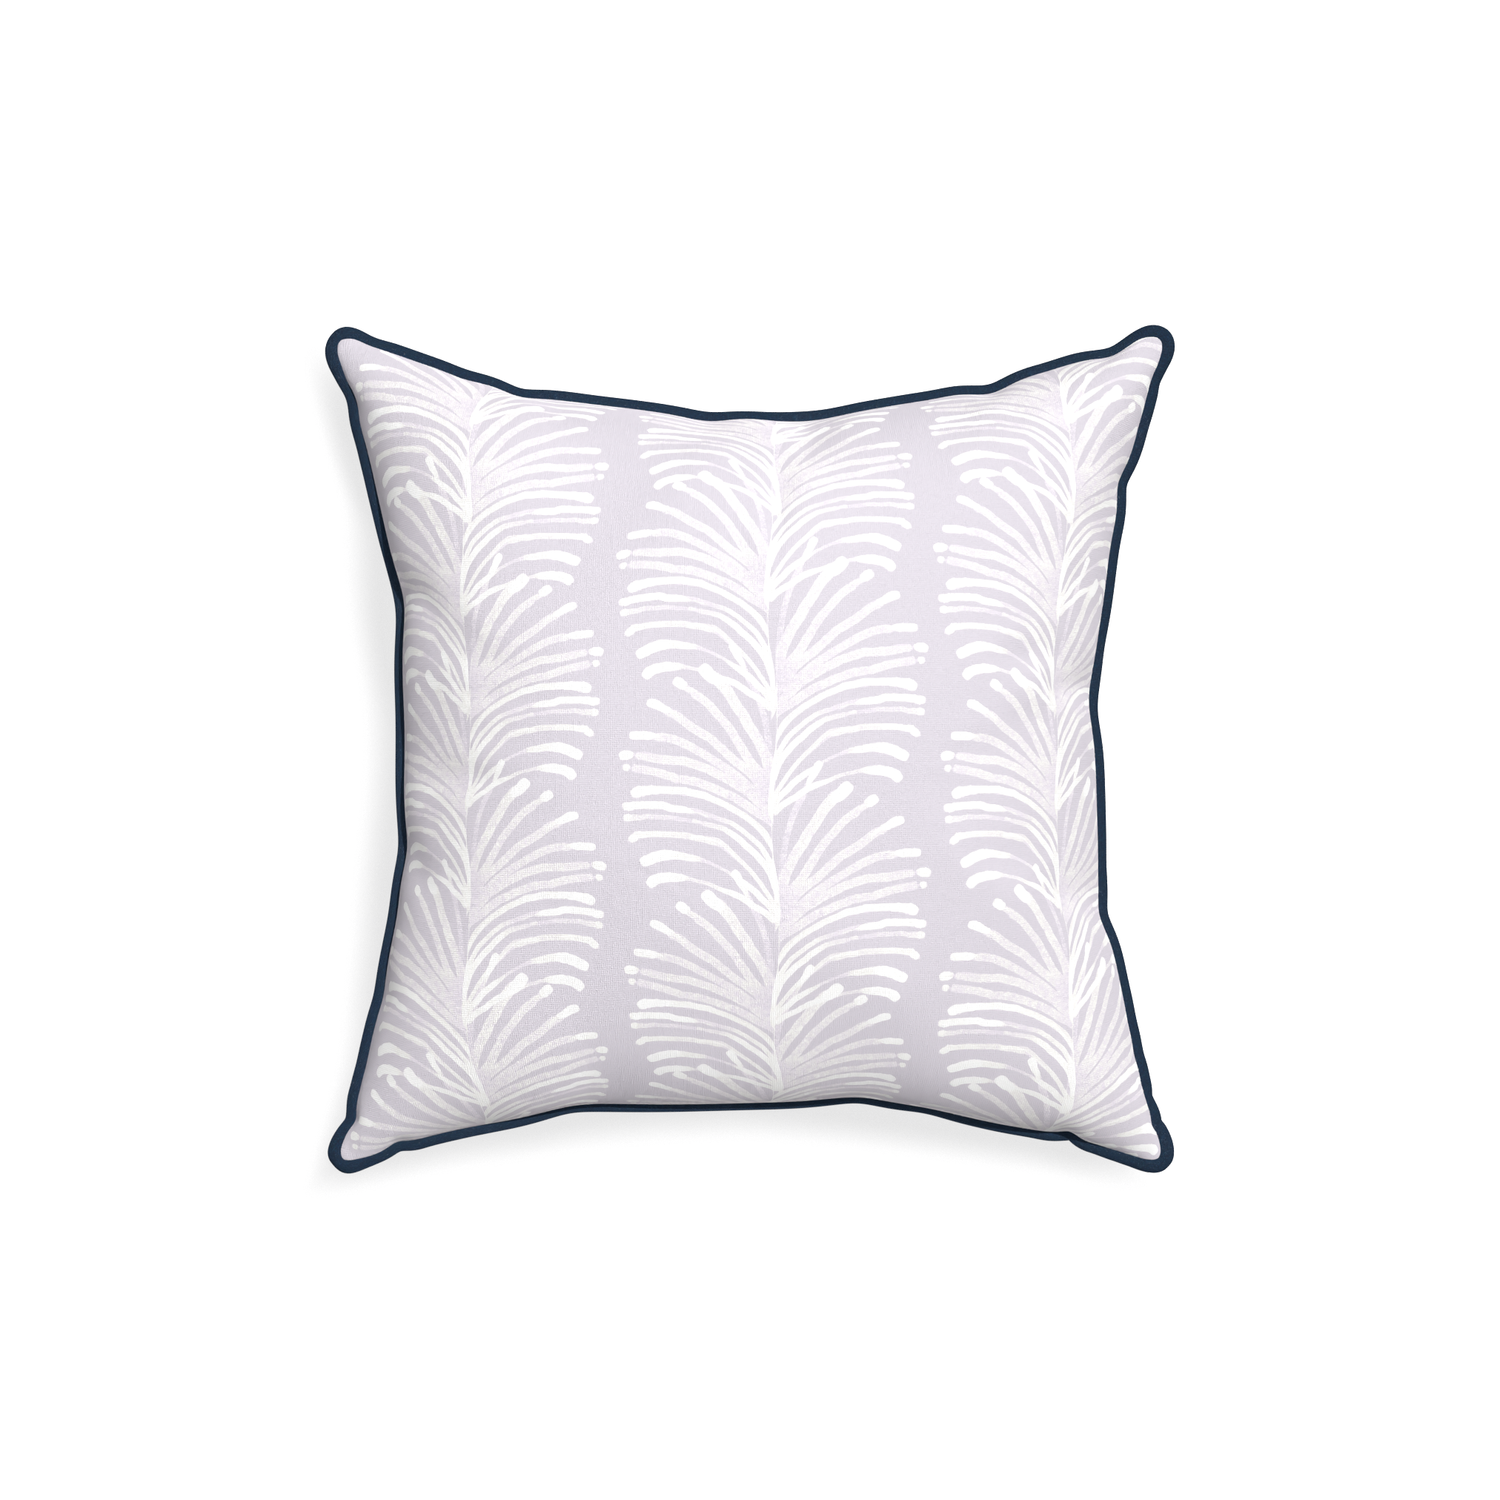 18-square emma lavender custom lavender botanical stripepillow with c piping on white background